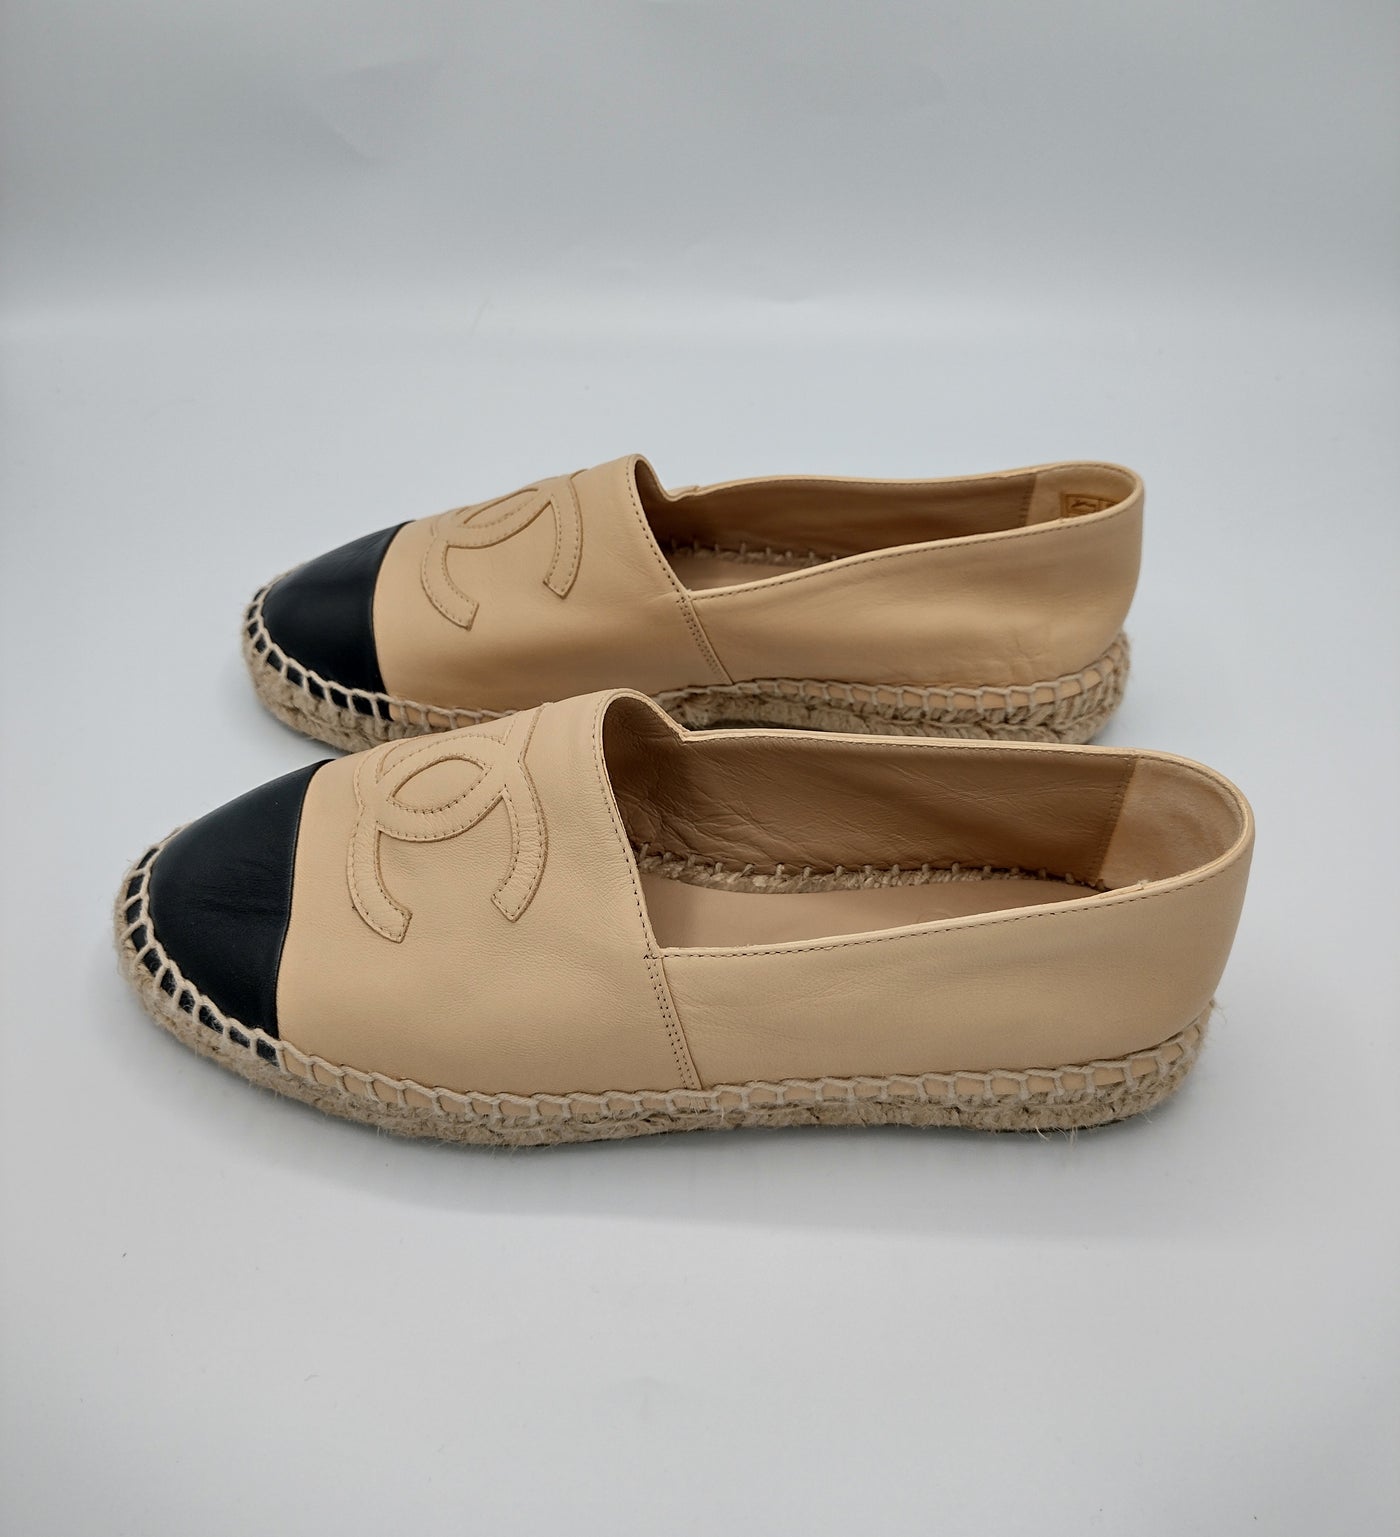 CHANEL two tones beige and black leather espadrilles size 37